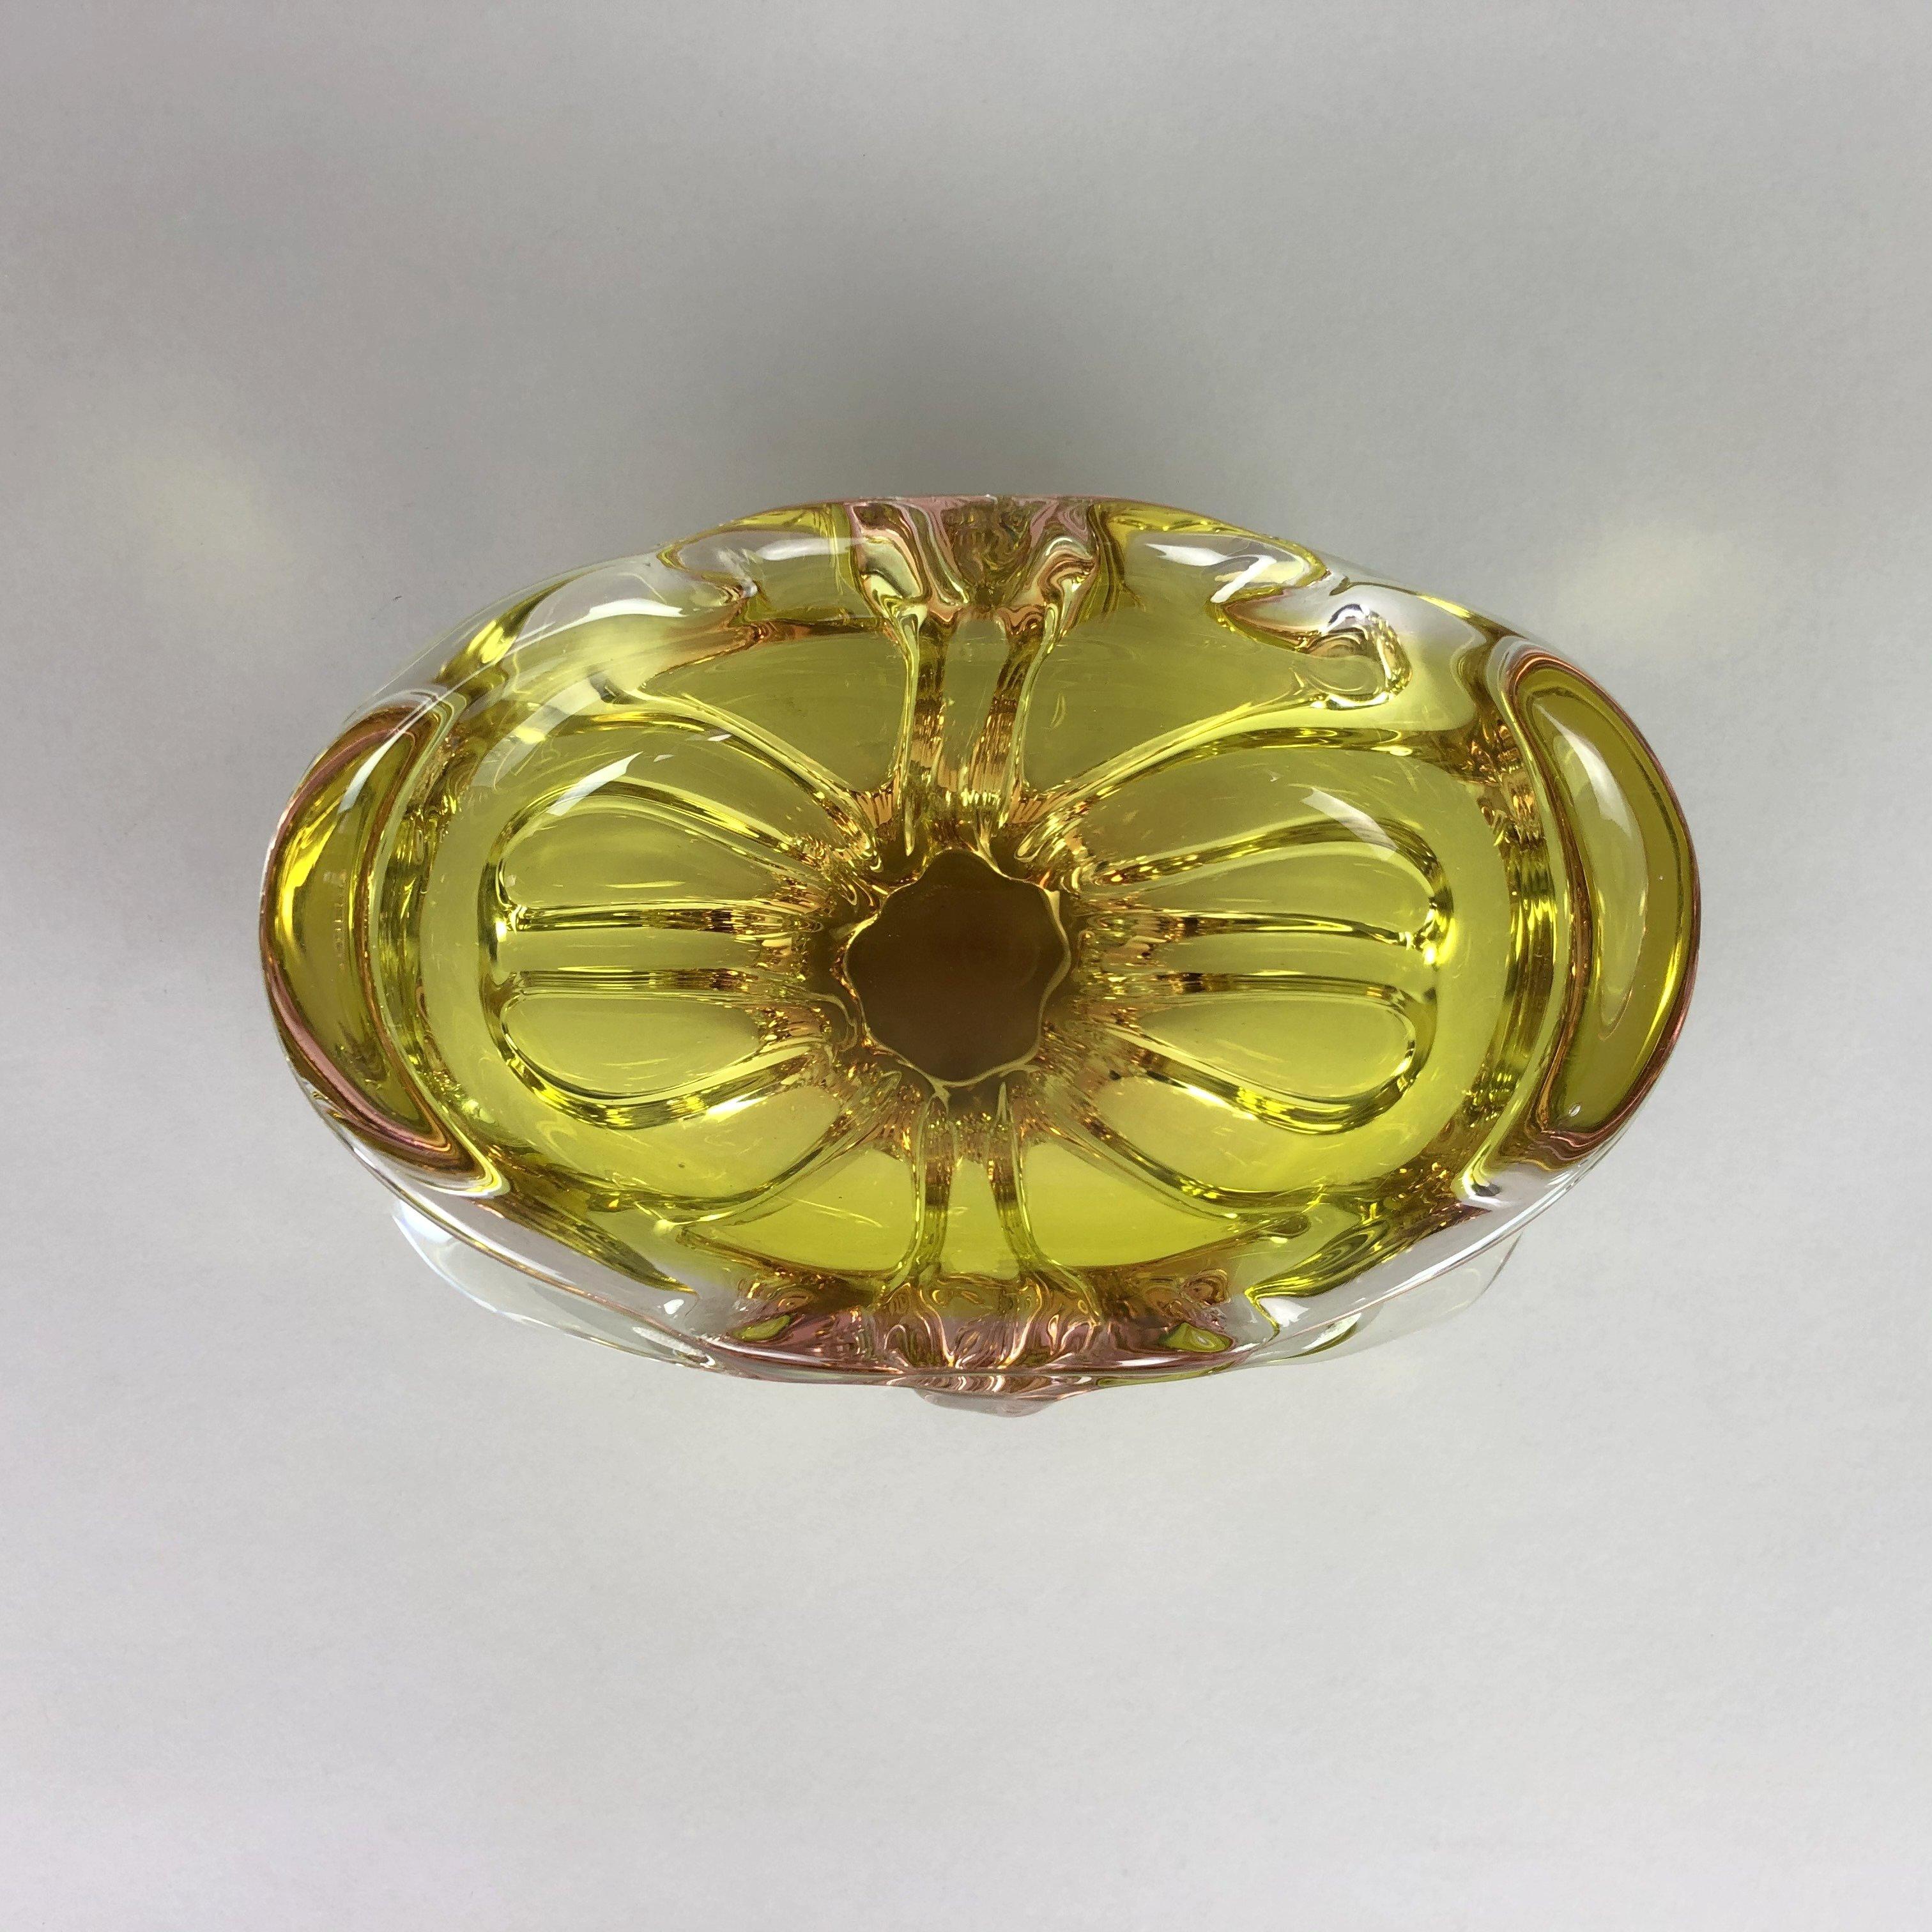 Art glass vintage bowl or ashtray designed by Josef Hospodka in the 1960's. Made by Chribska Glassworks in Czechoslovakia. Very good vintage condition.